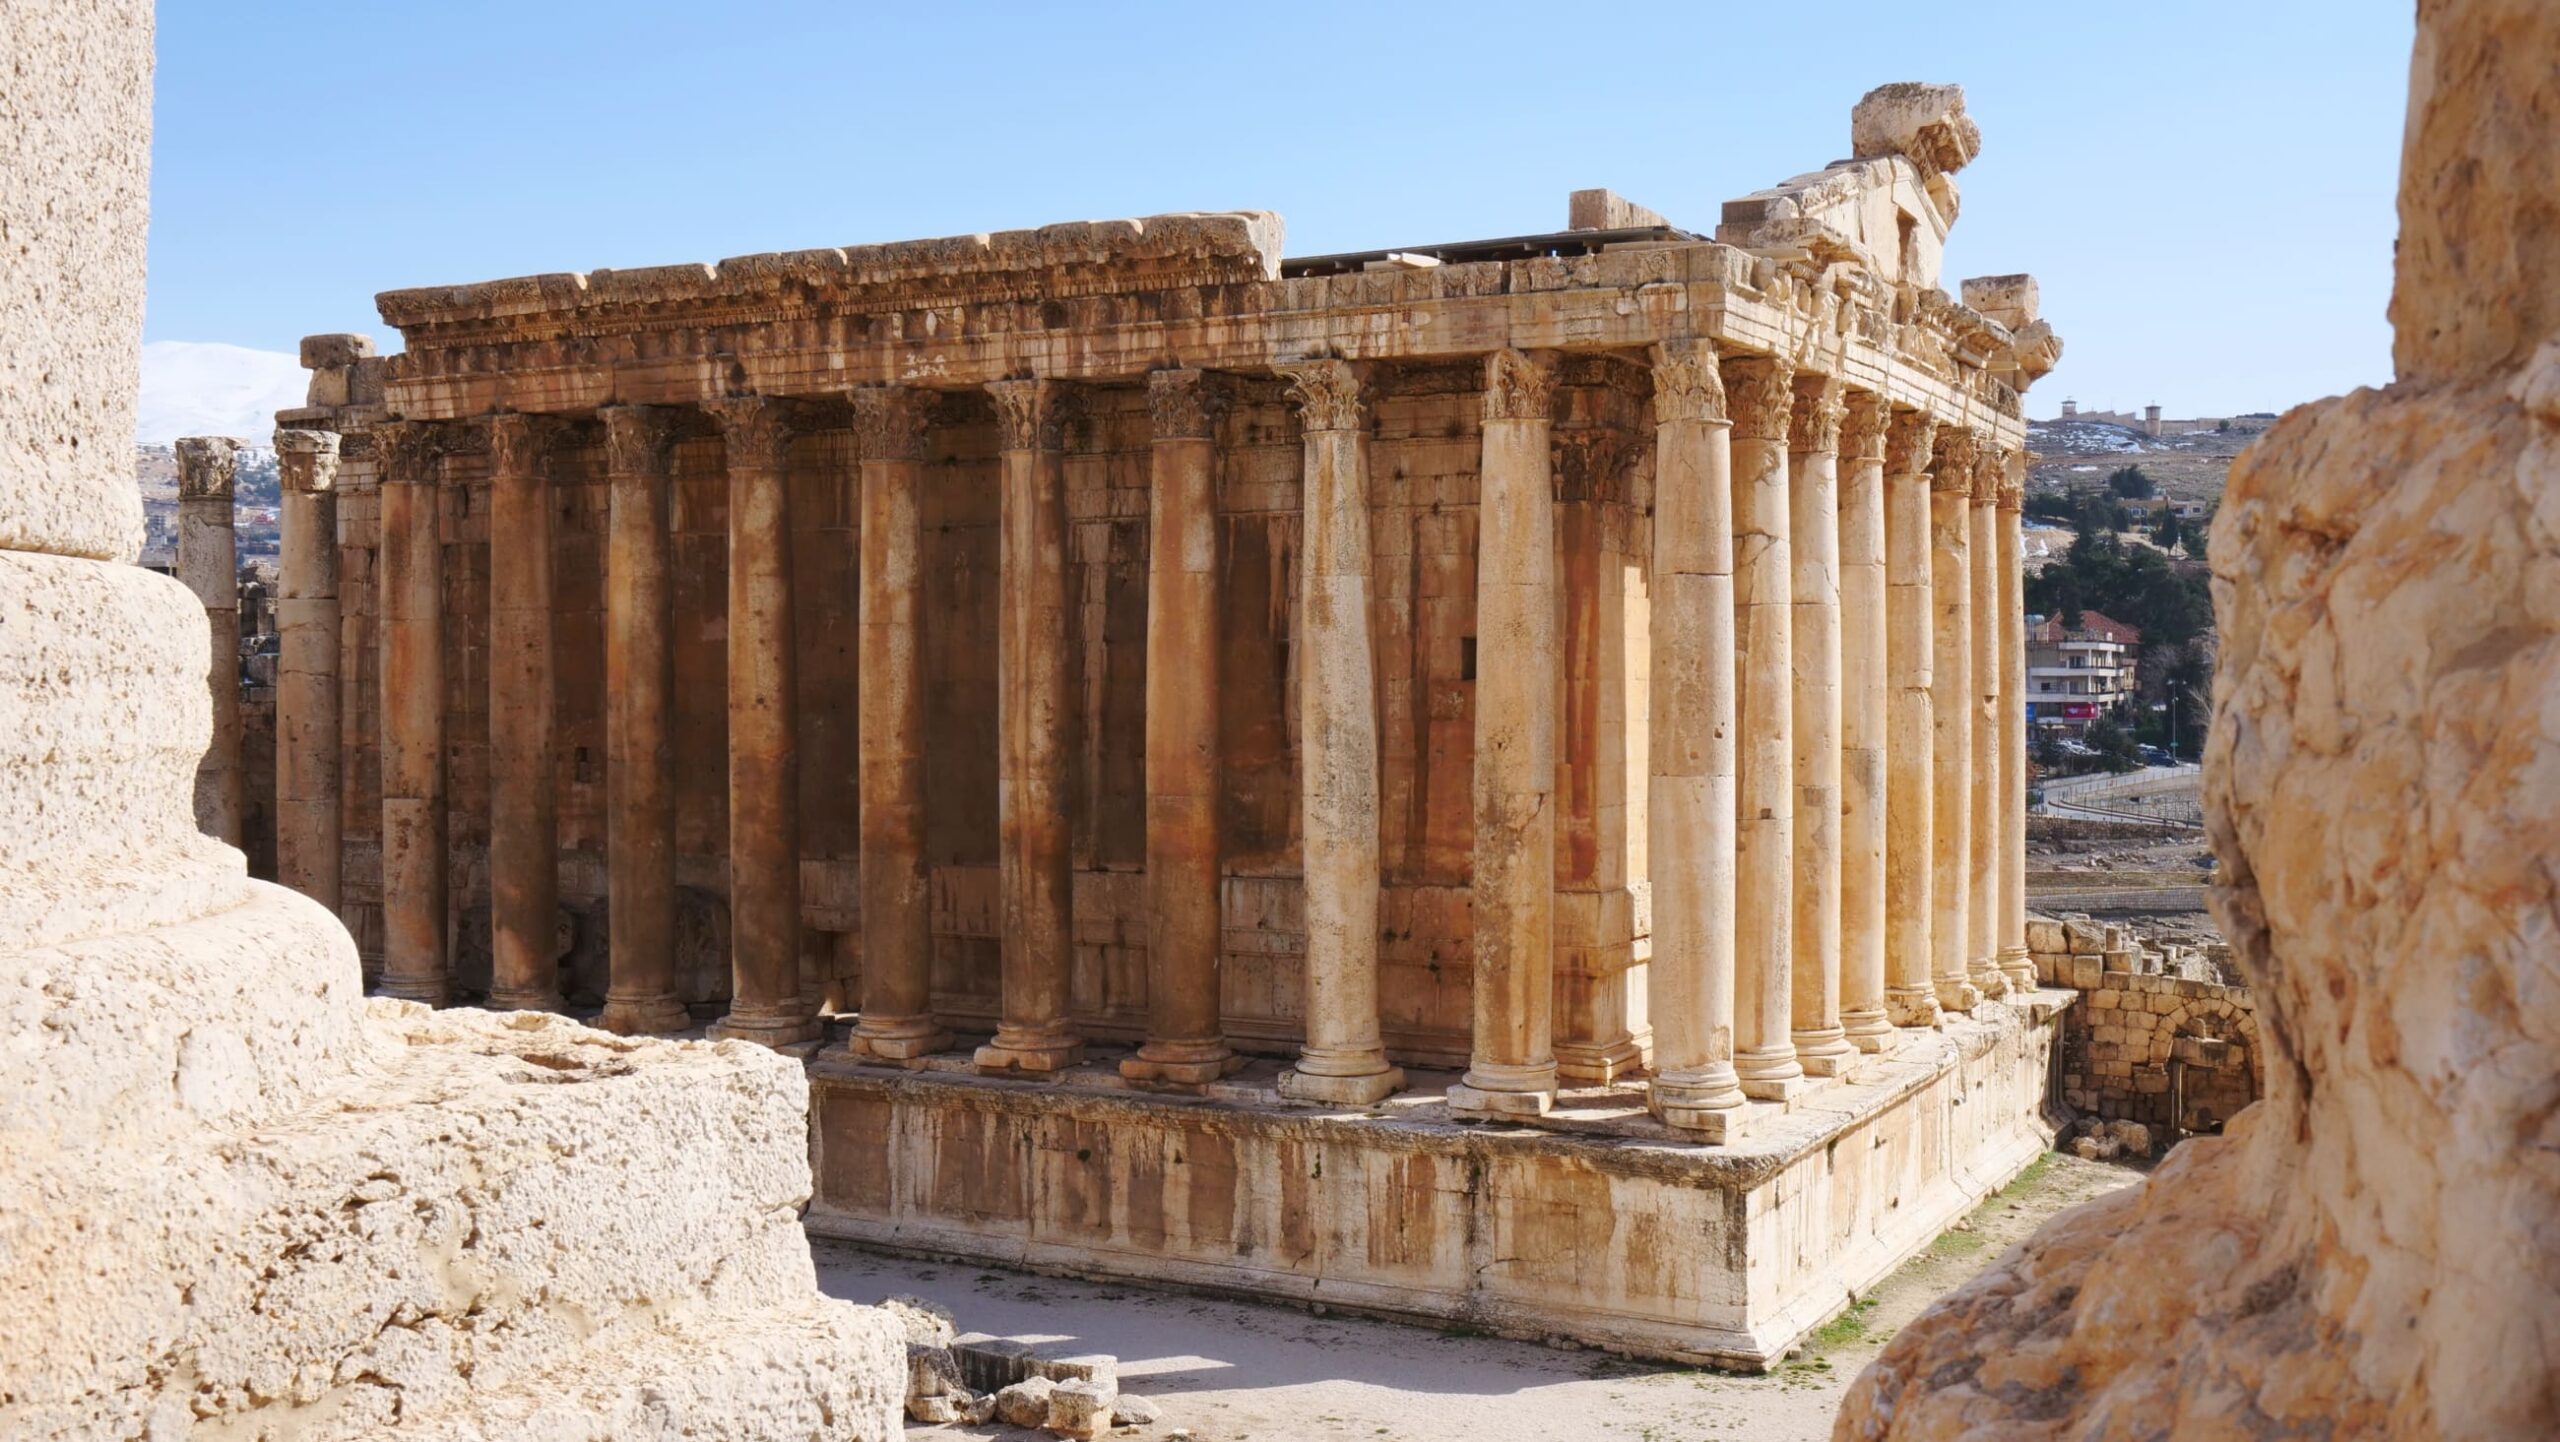 The Temple of Bacchus at Baalbek, Lebanon